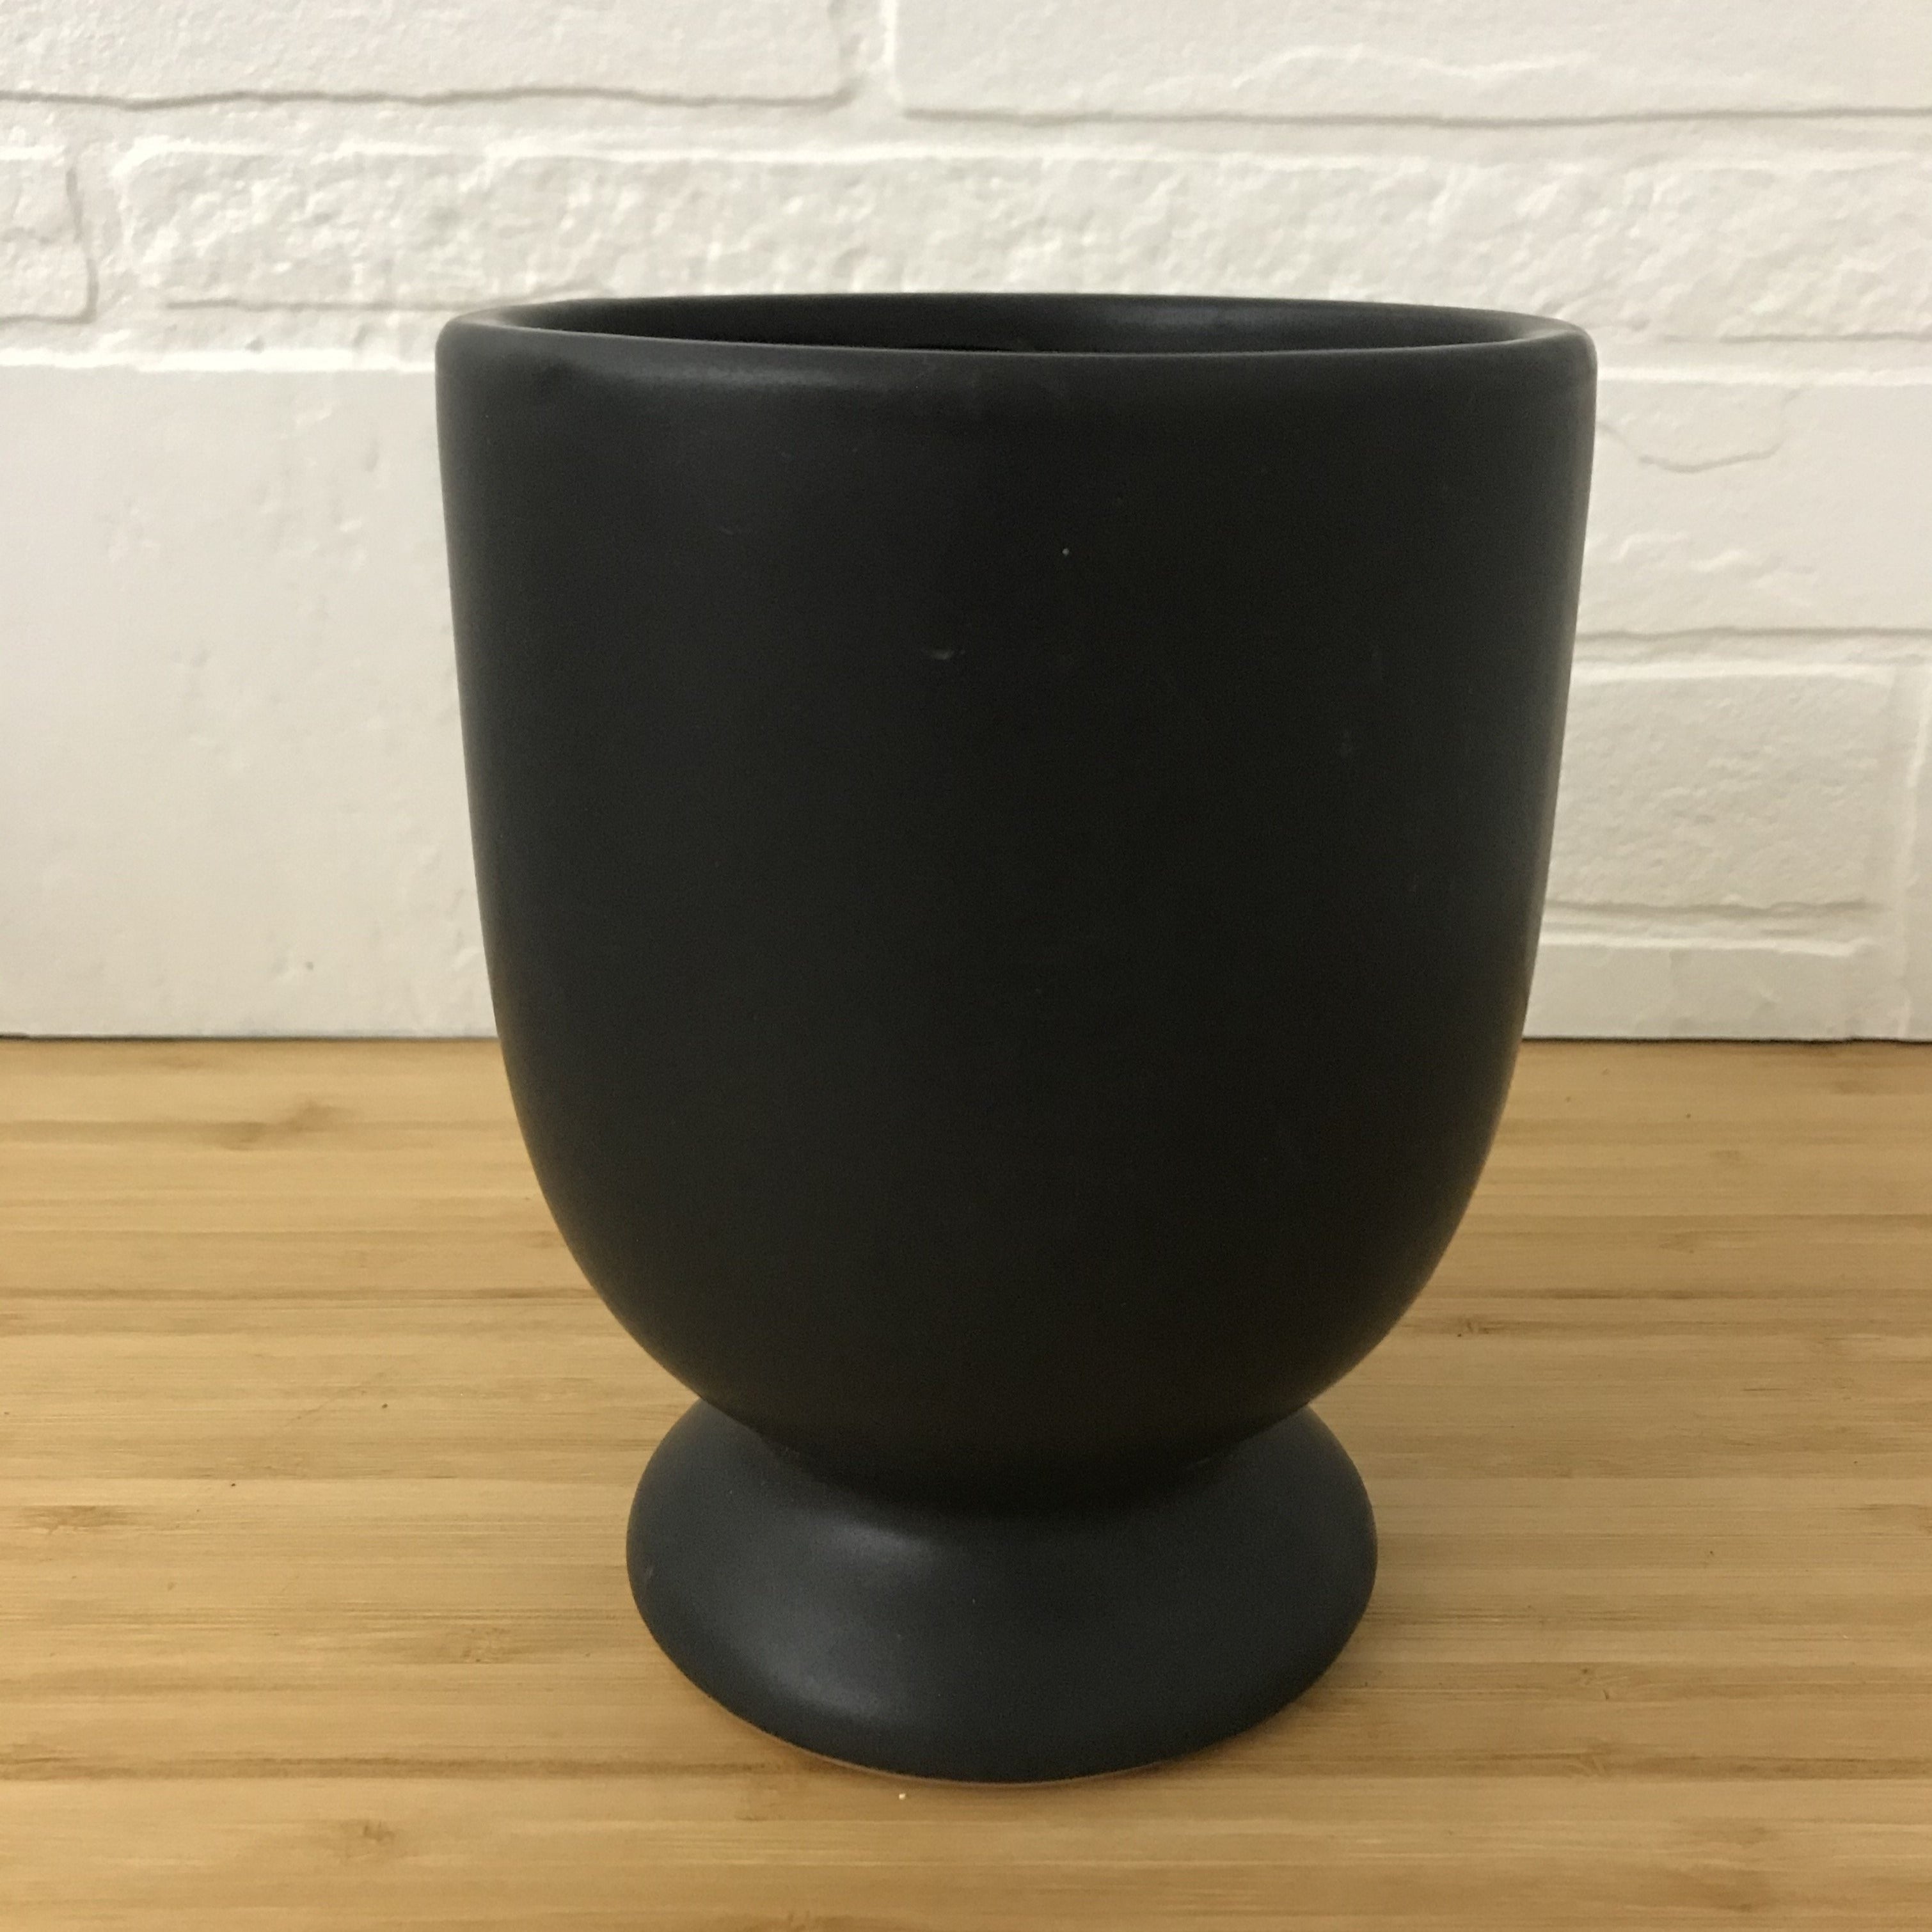 4" black footed plant pot